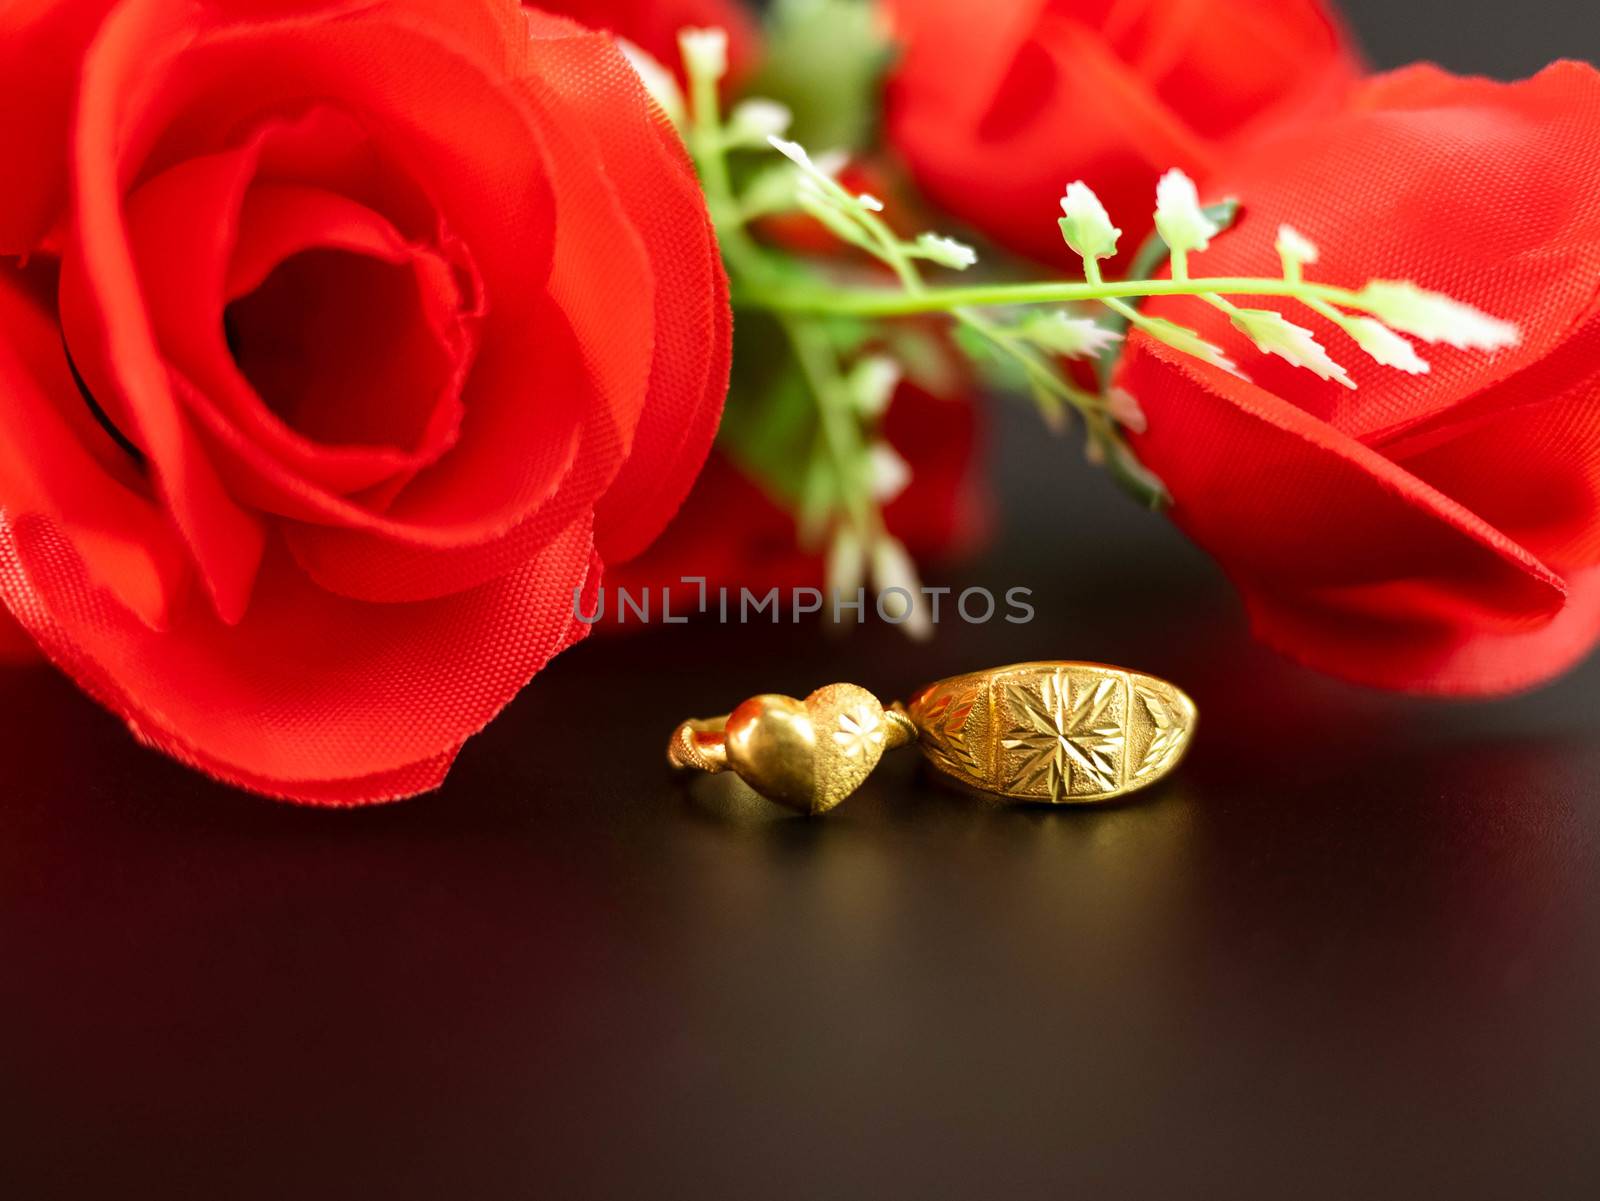 Wedding celebration on valentines day with red rose bouquet, wedding rings, isolated on dark background. Concept of love and romance. by TEERASAK